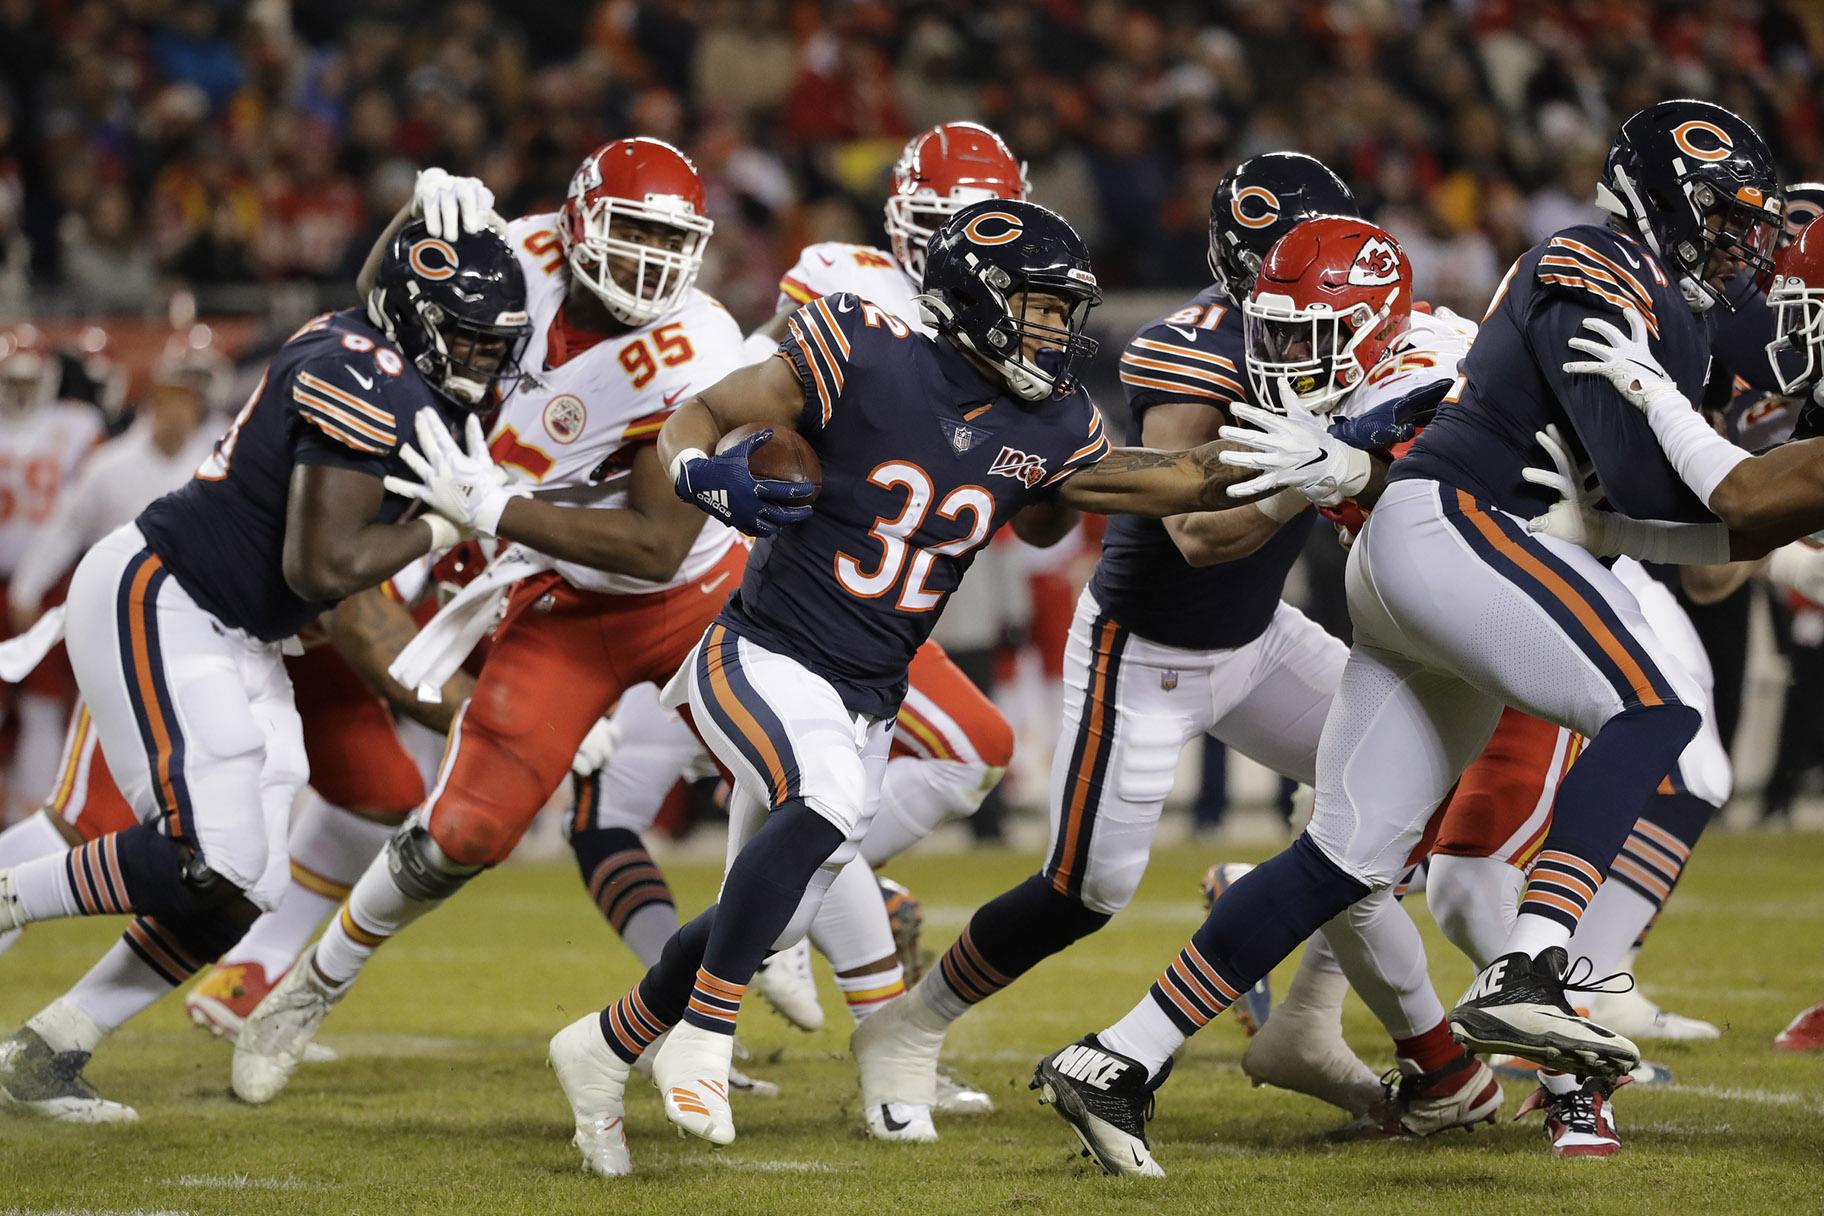 Mahomes Throws 2 TDs, Runs for 1 as Chiefs Beat Bears 26-3, Chicago News